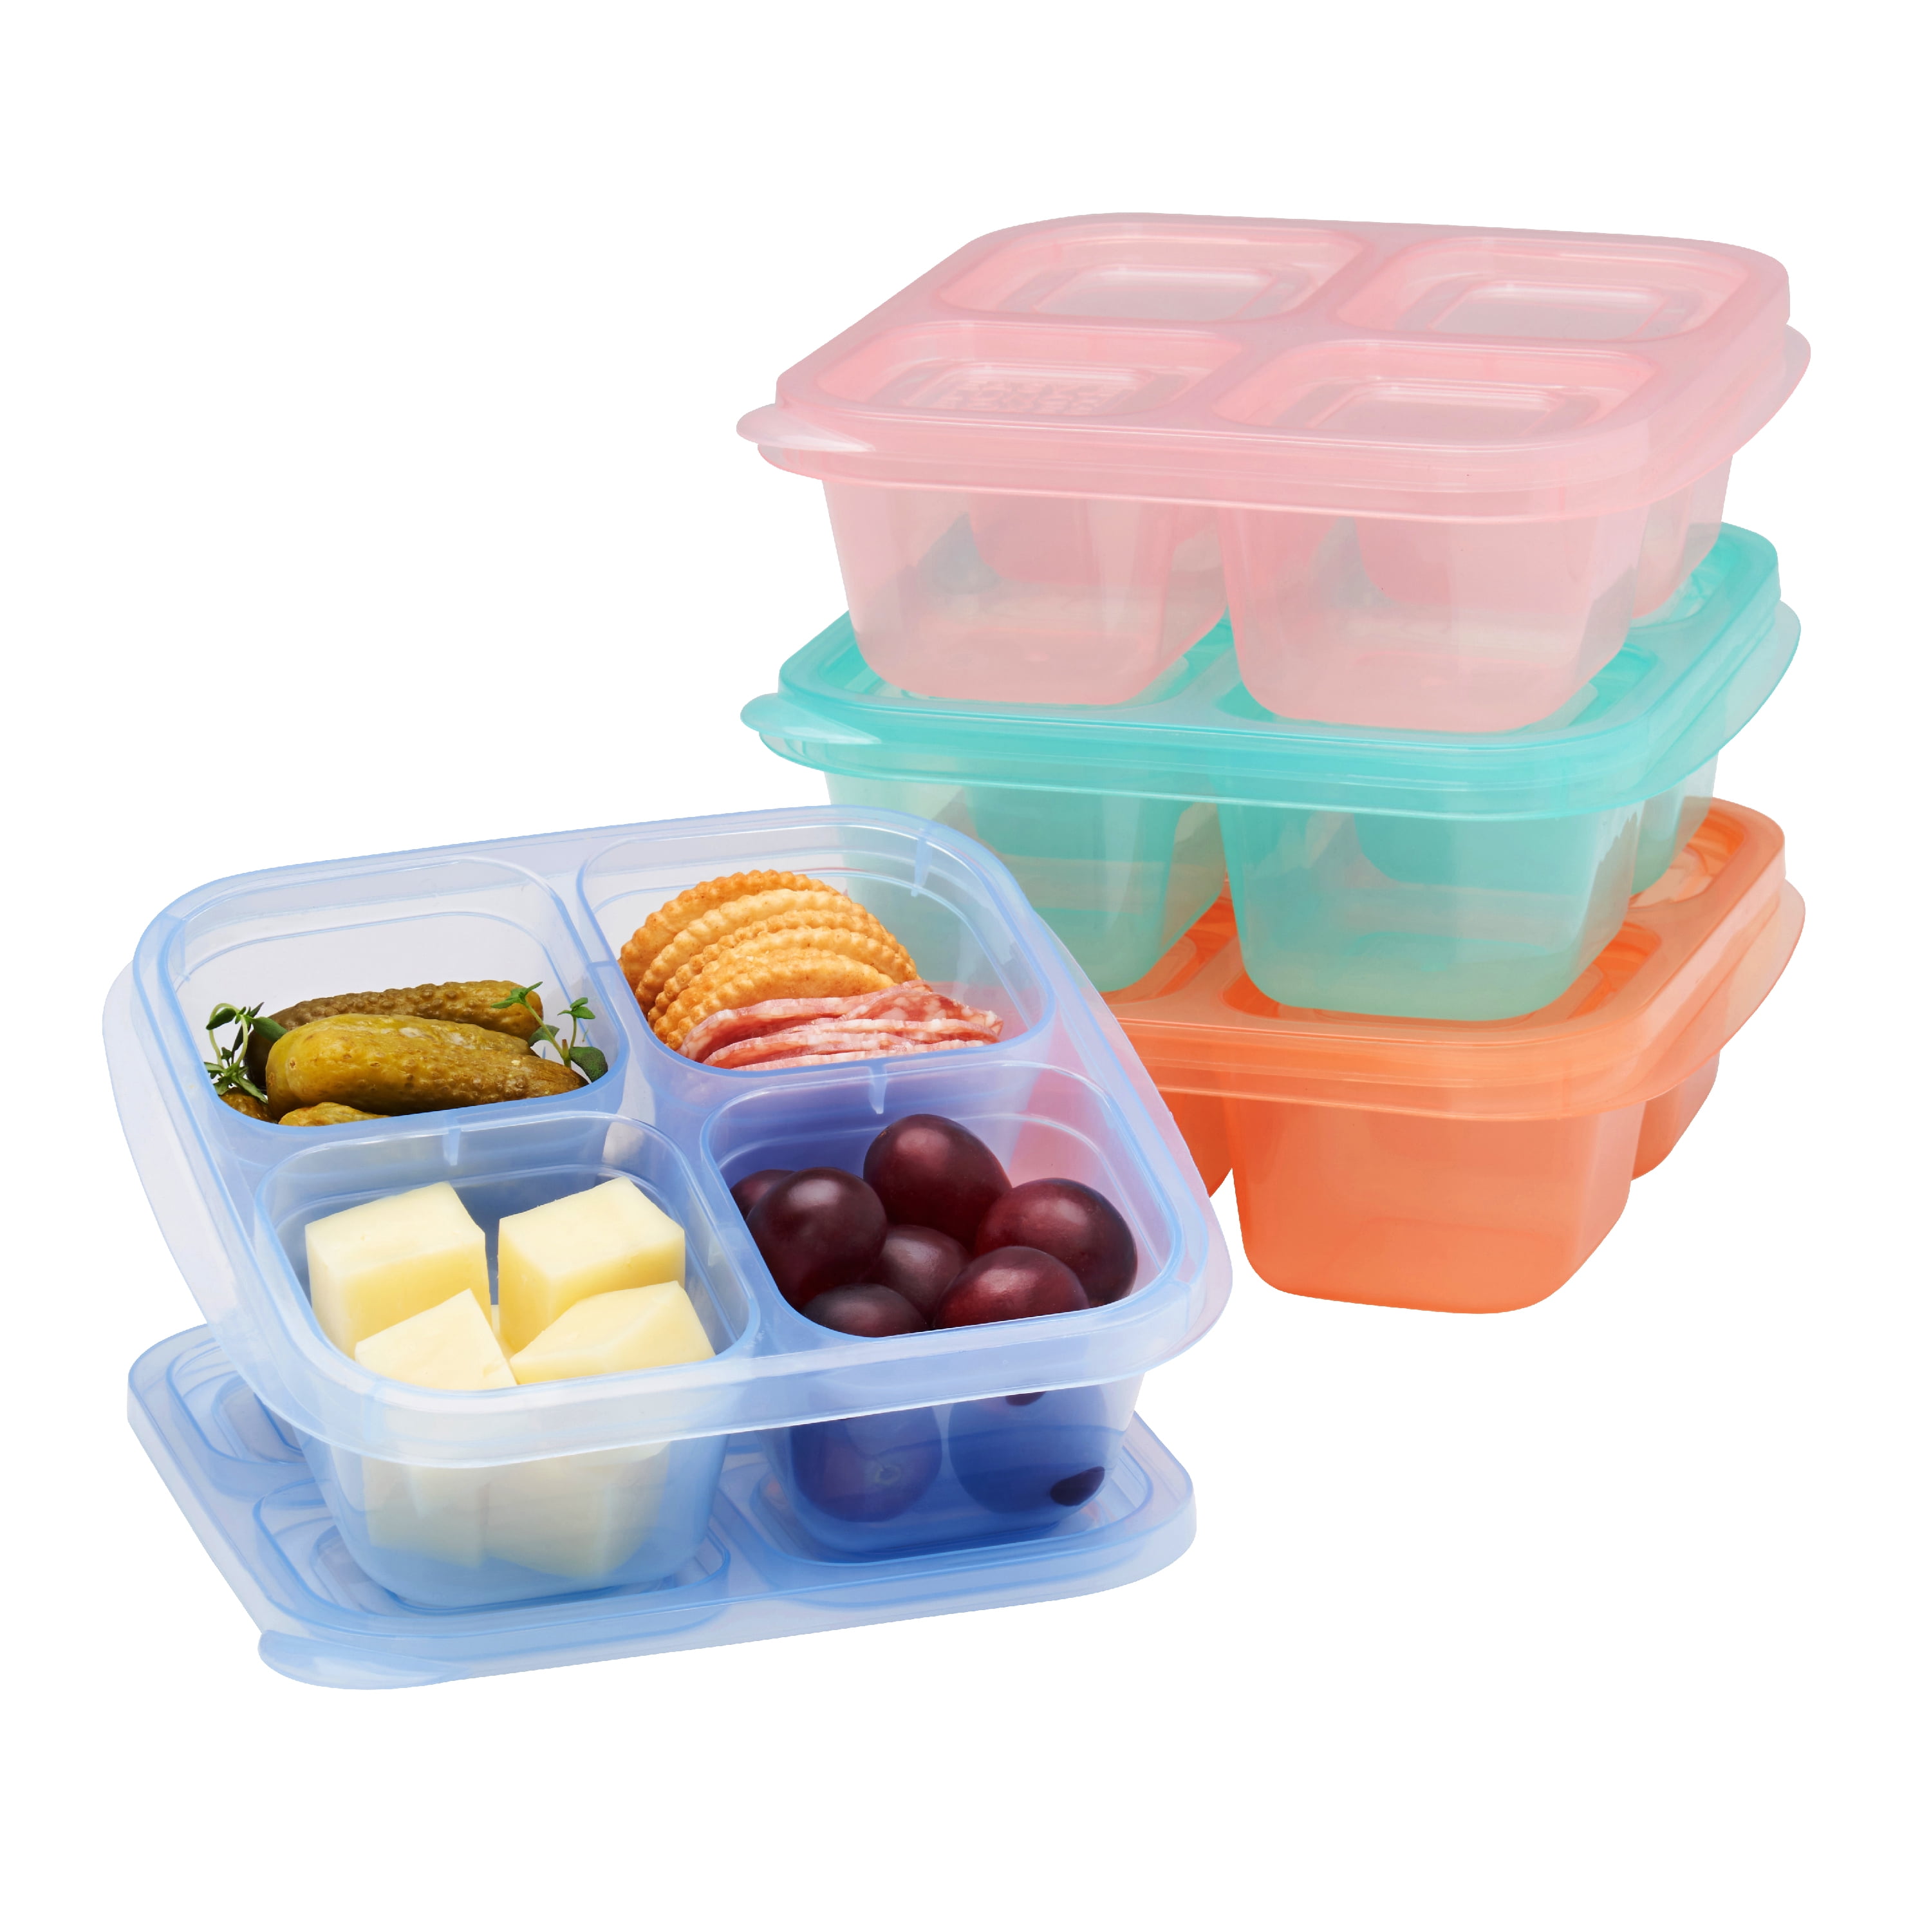 Easylunchboxes - Bento Lunch Boxes - Reusable 3-Compartment Food Containers for School, Work, and Travel, Set of 4, (Jewel Brights), Multicolor